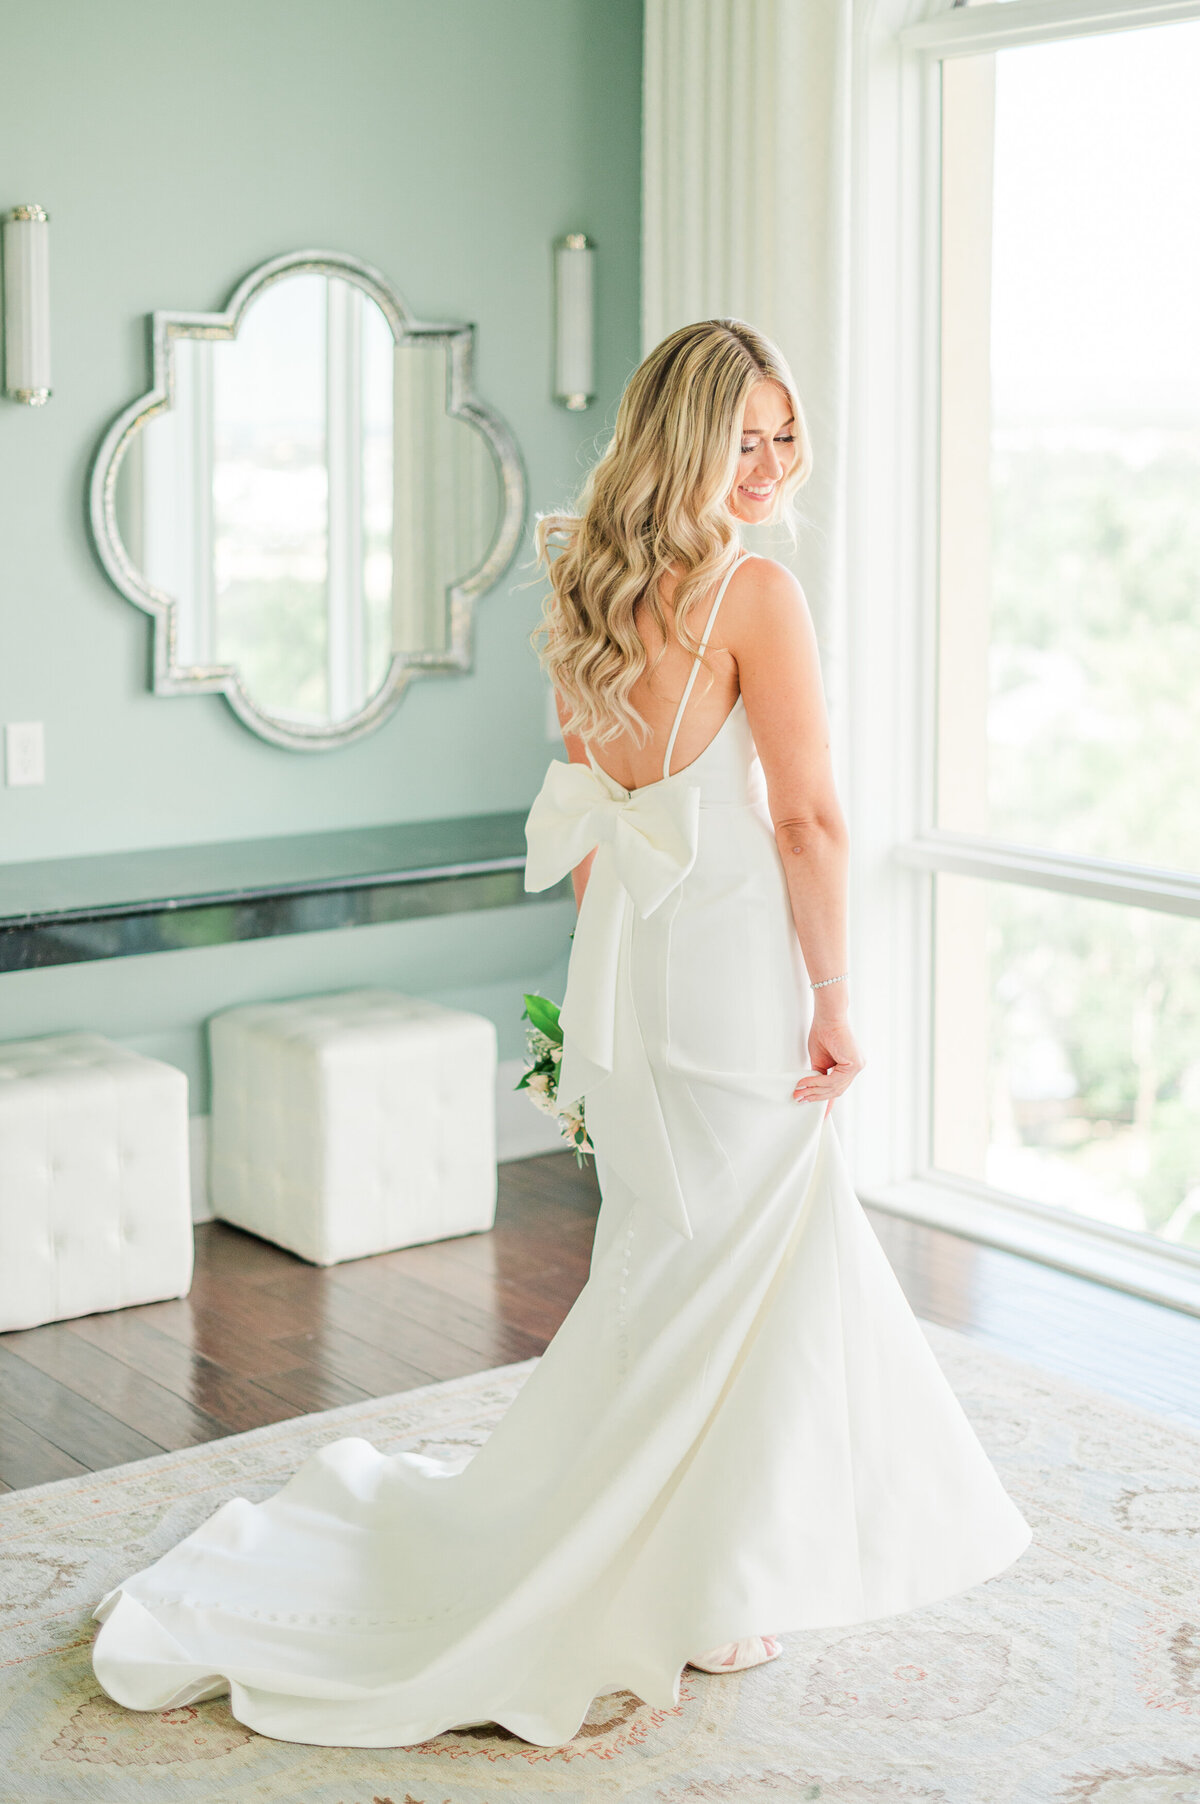 A blond bride showing off her wedding dress in the bridal suite at the Pinery at the Hill.